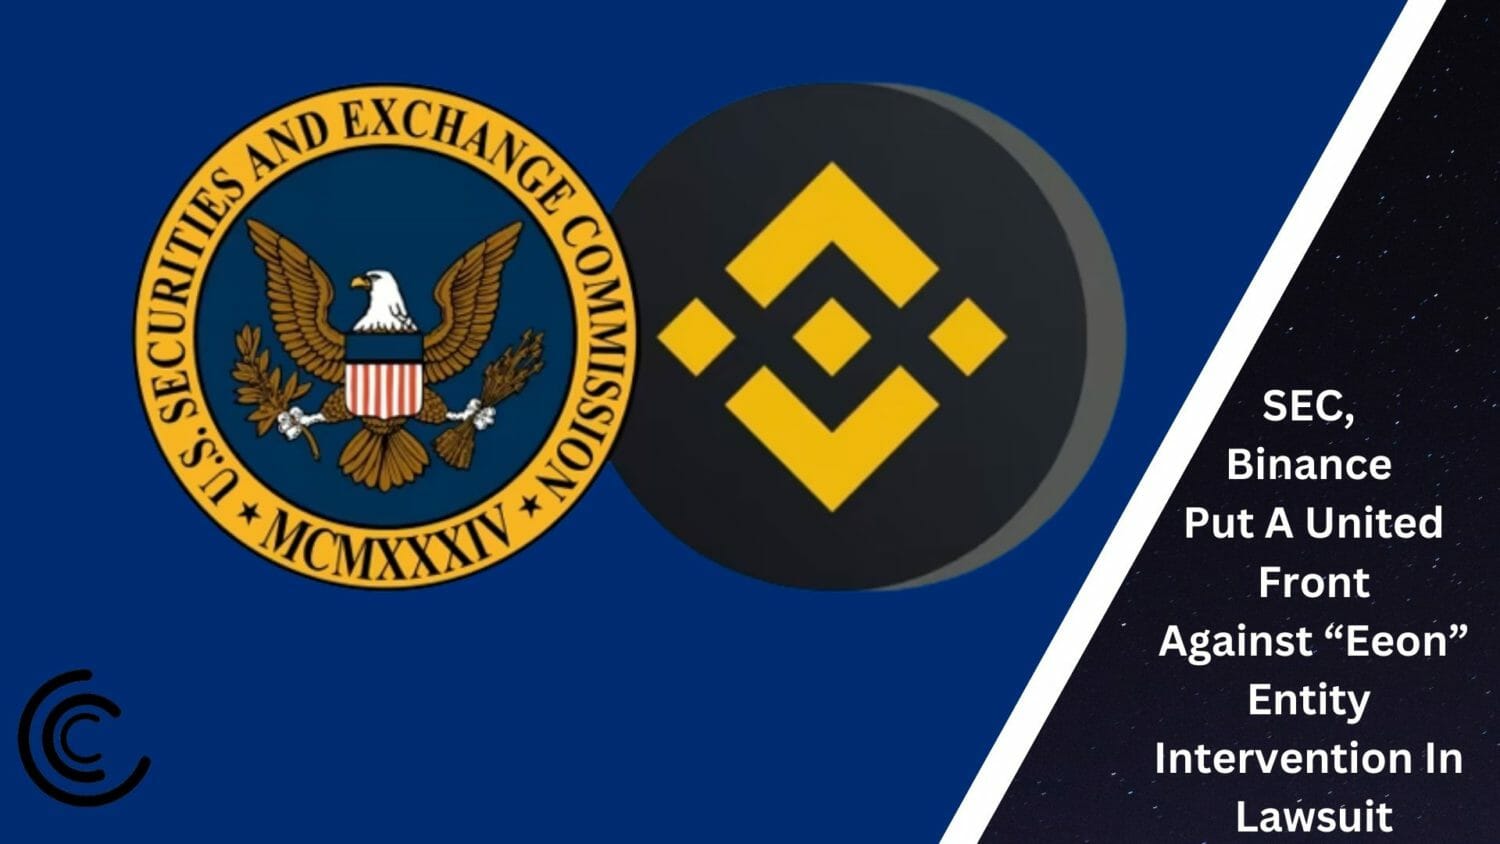 Sec, Binance Put A United Front Against “Eeon” Entity Intervention In Lawsuit